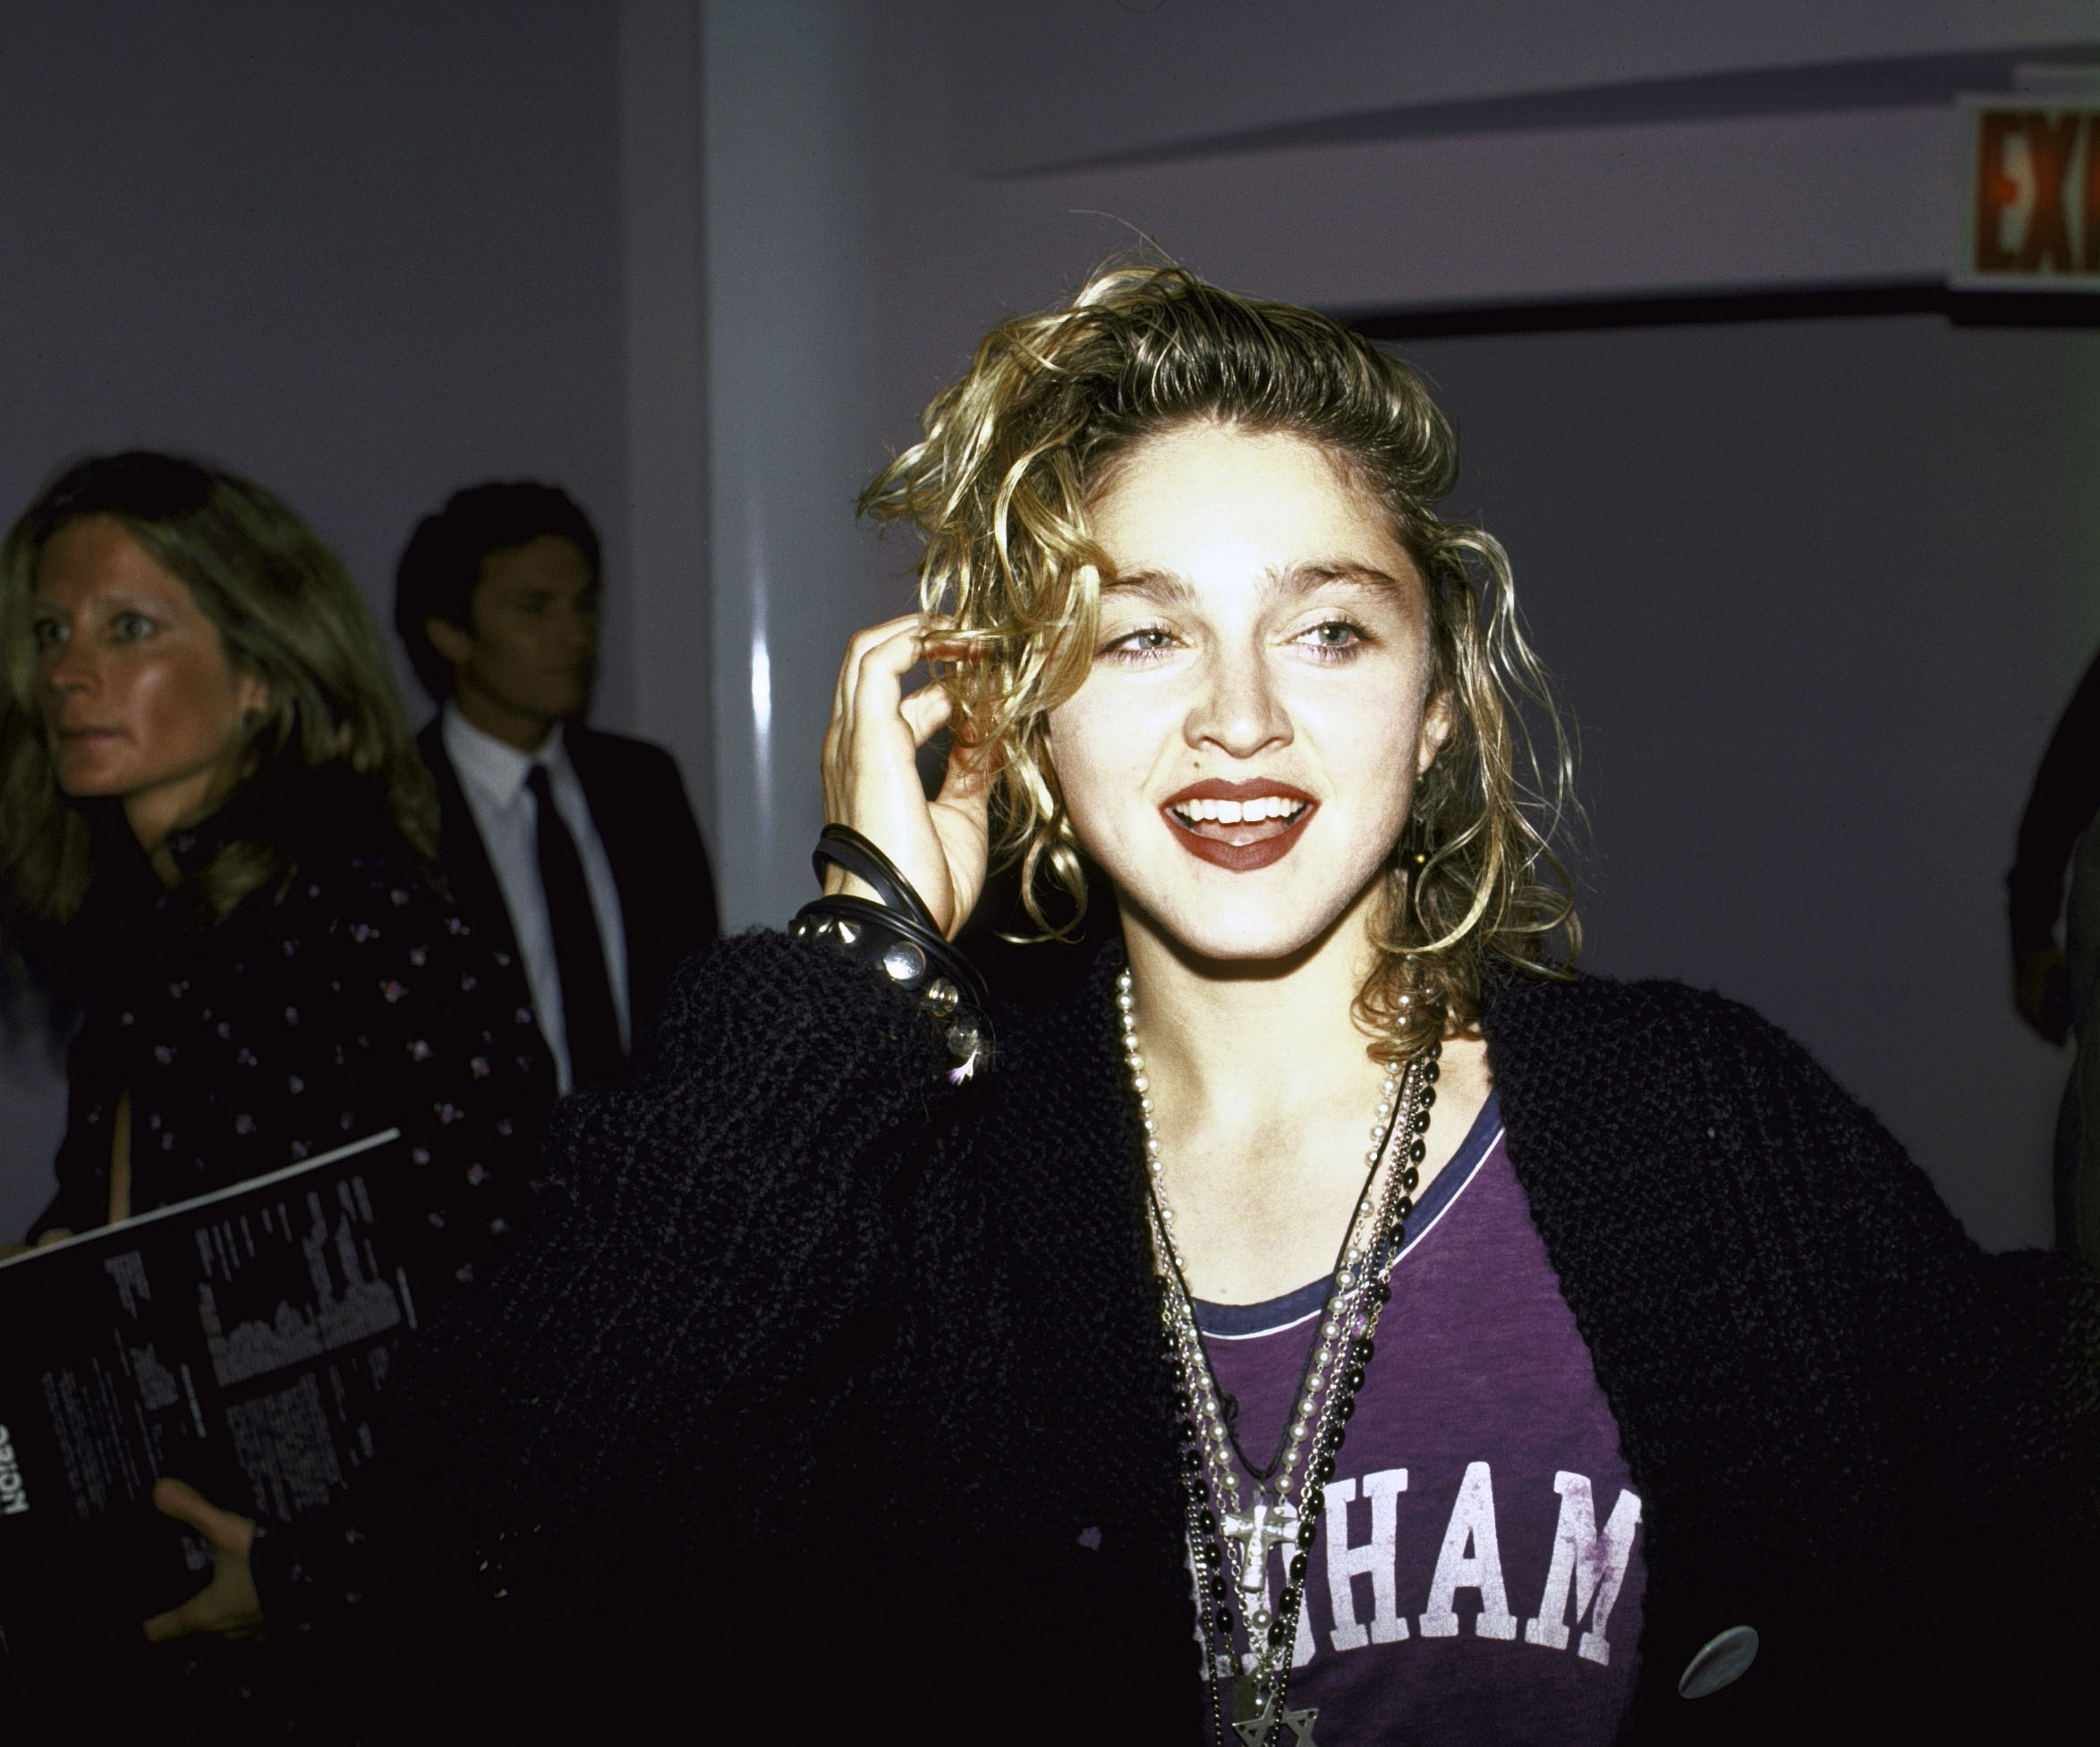 How MTV Helped Madonna Score a Hit by Banning a Controversial Video